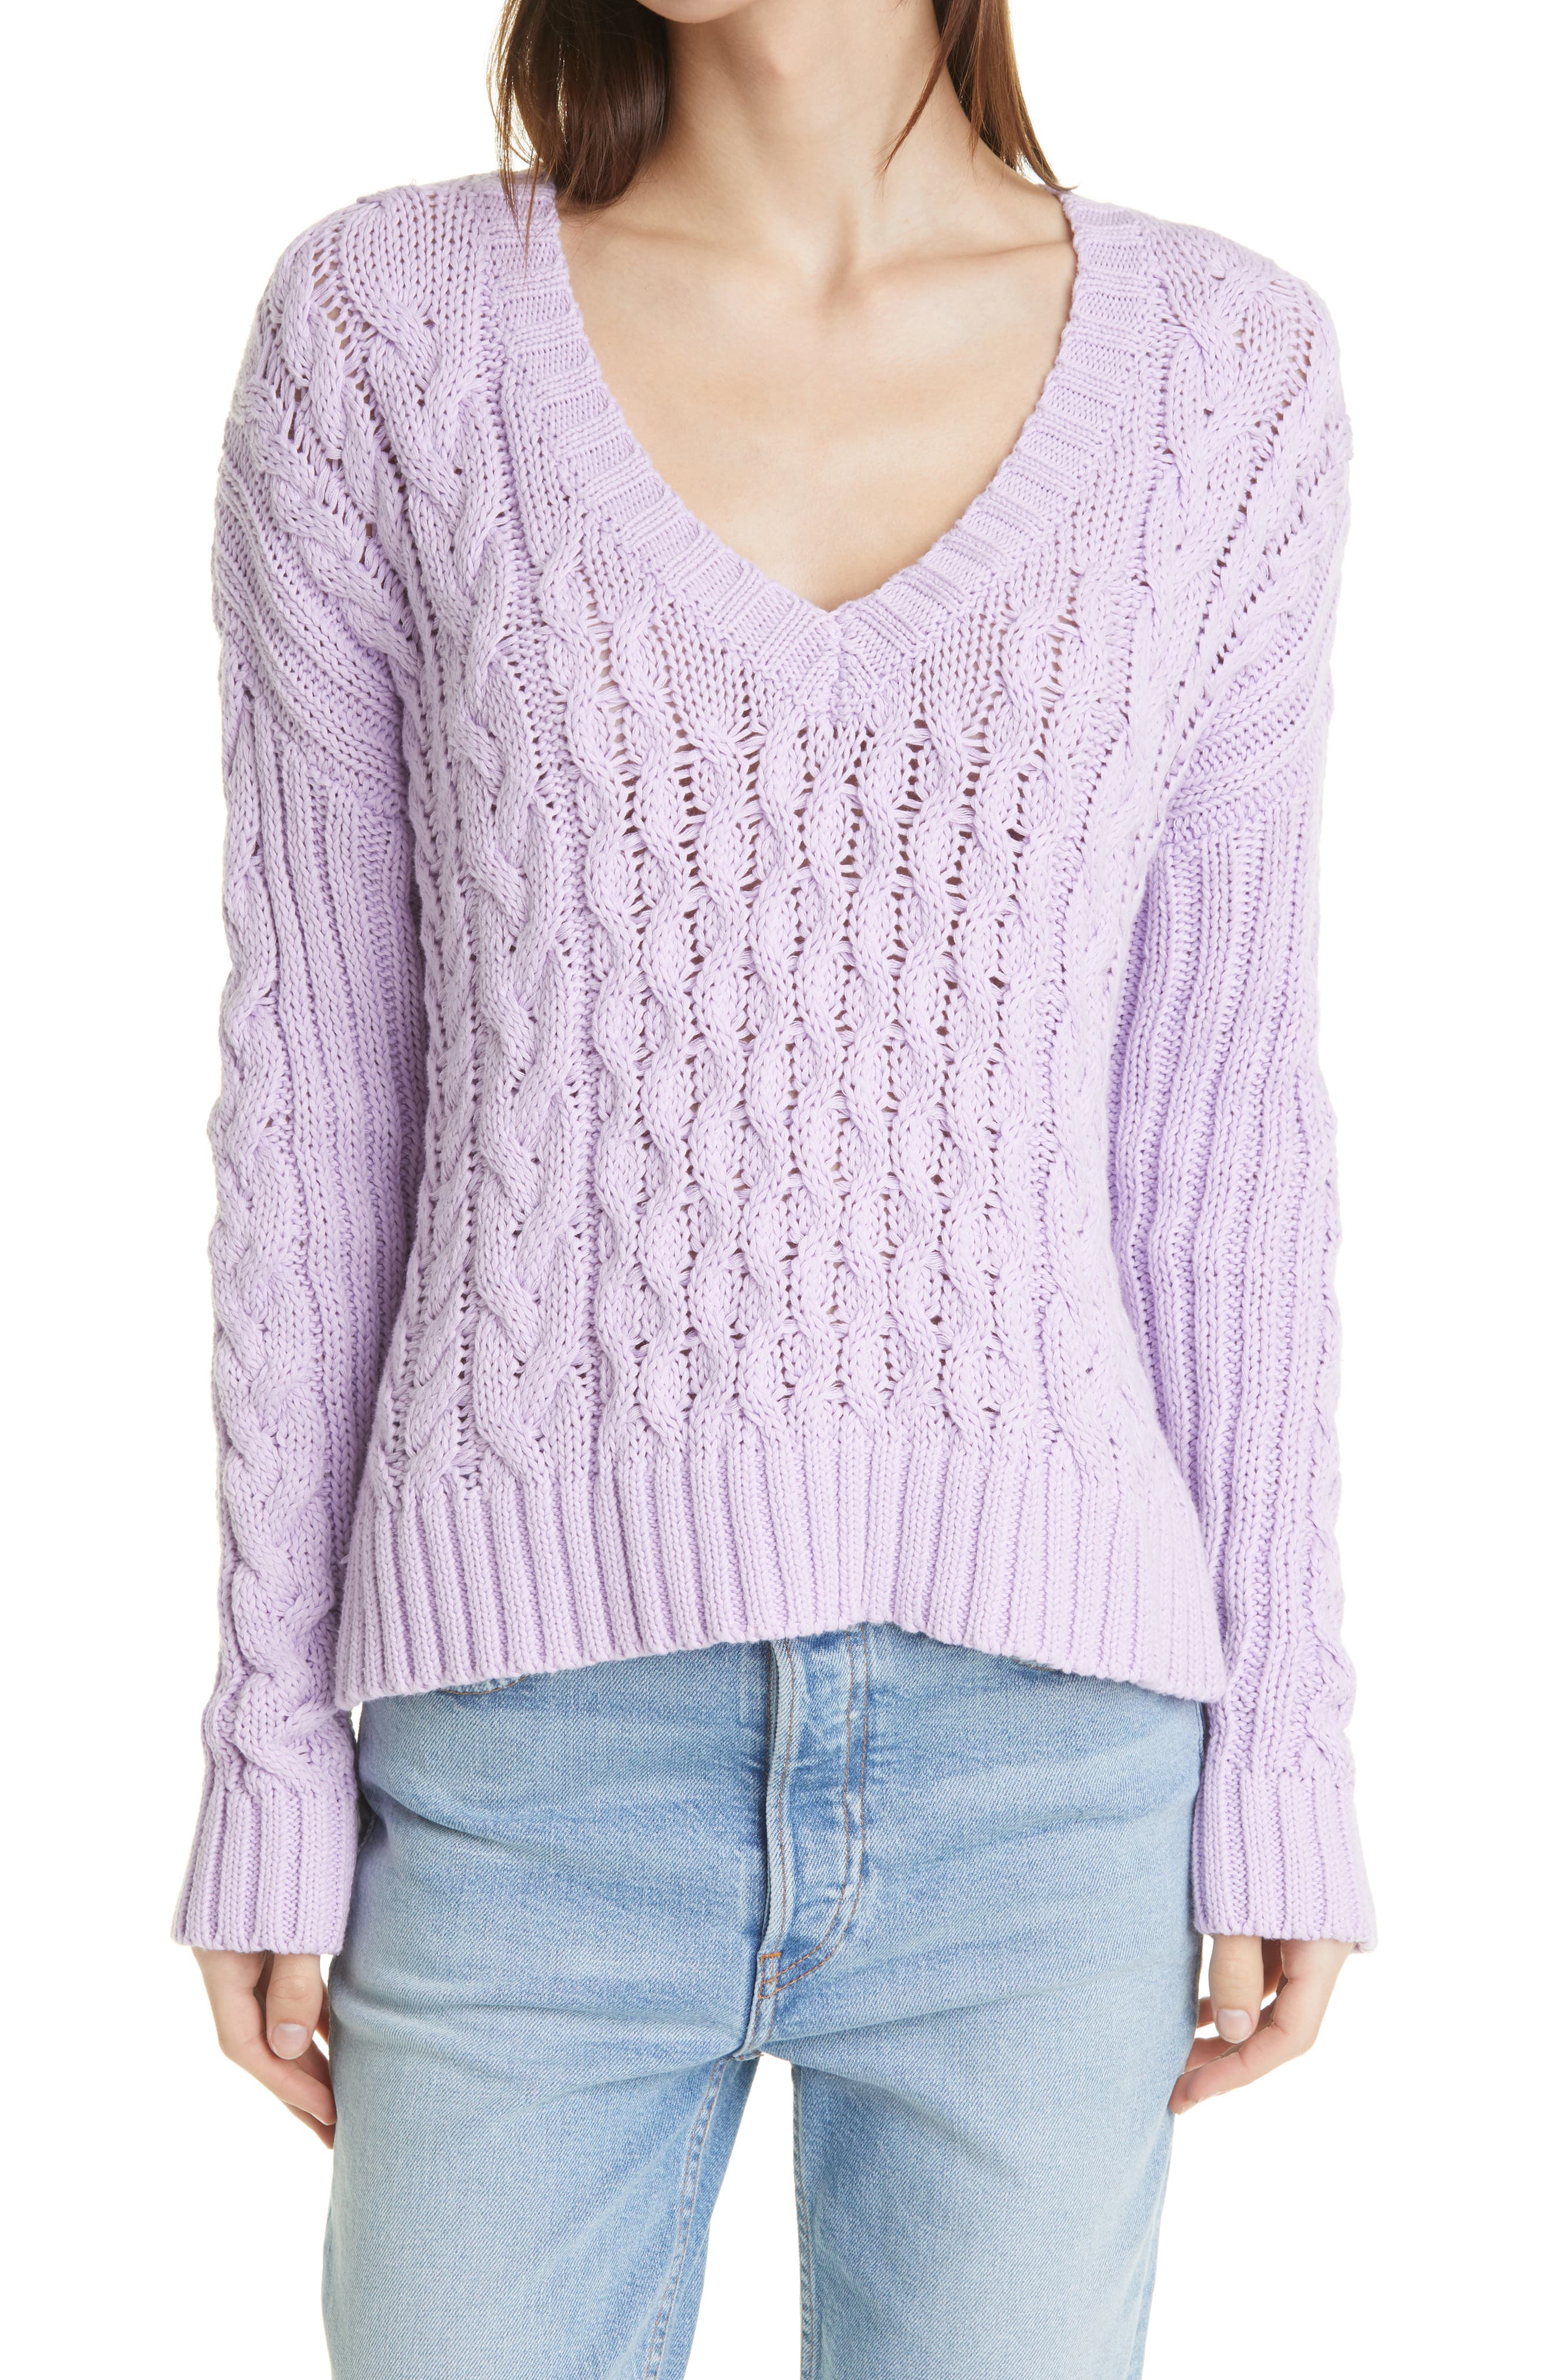 Women's Line Leah V-Neck Cable Knit Sweater